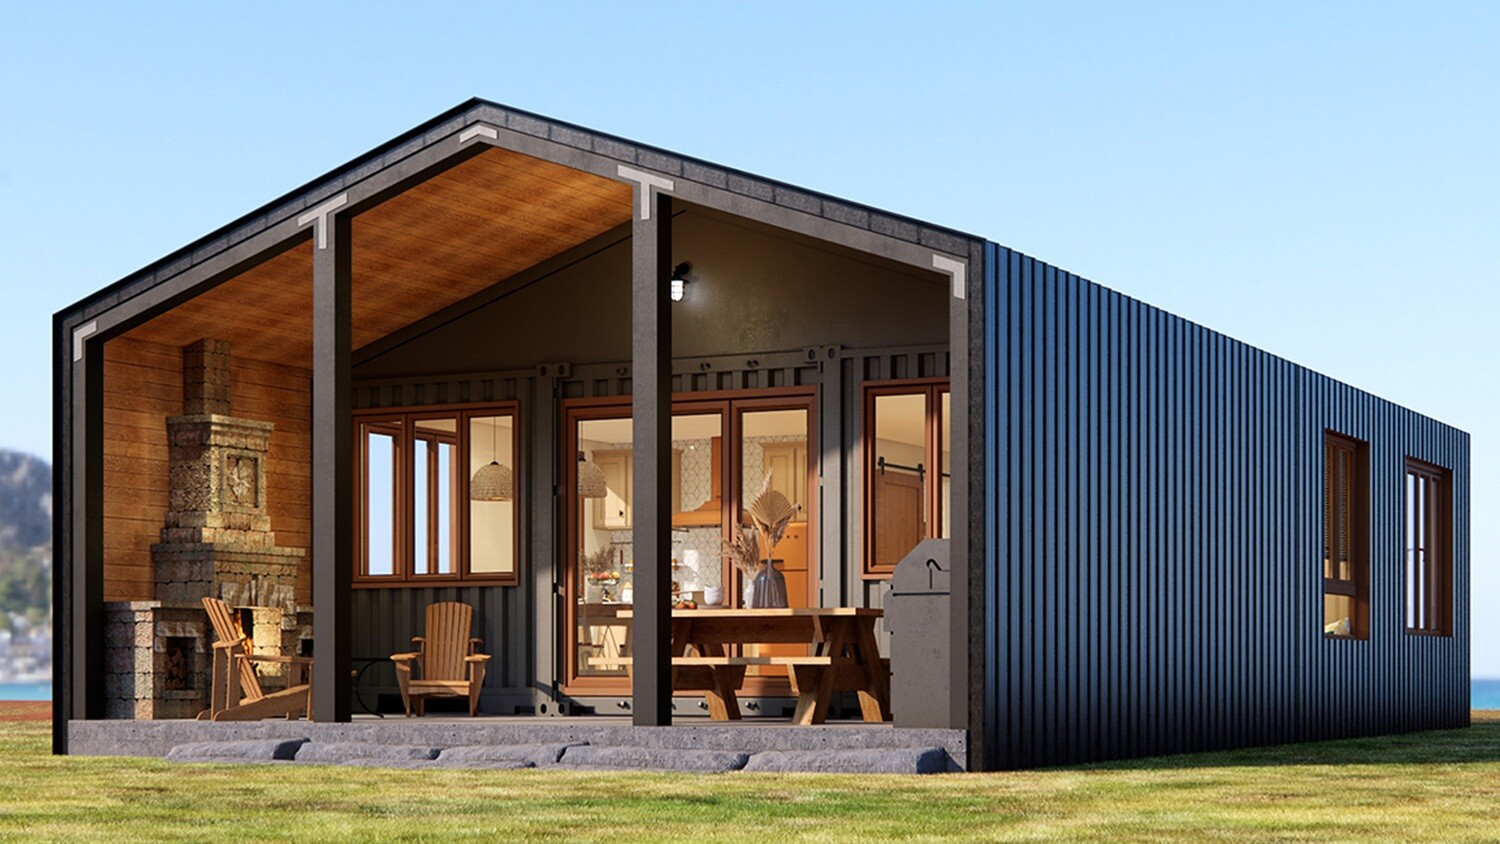 Detailed design of the container house BG30